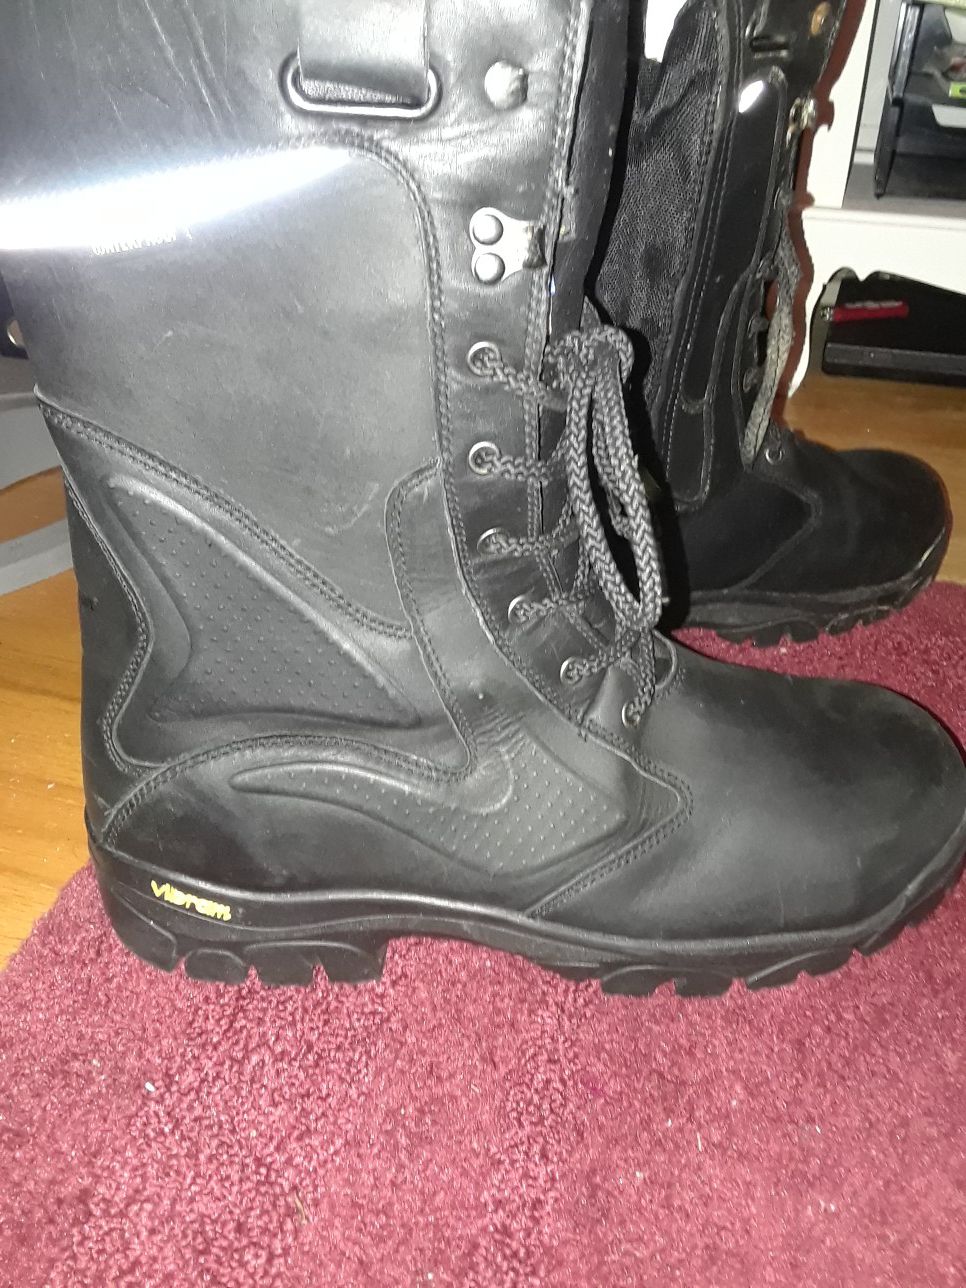 Vibram work boots size 12 pick up only